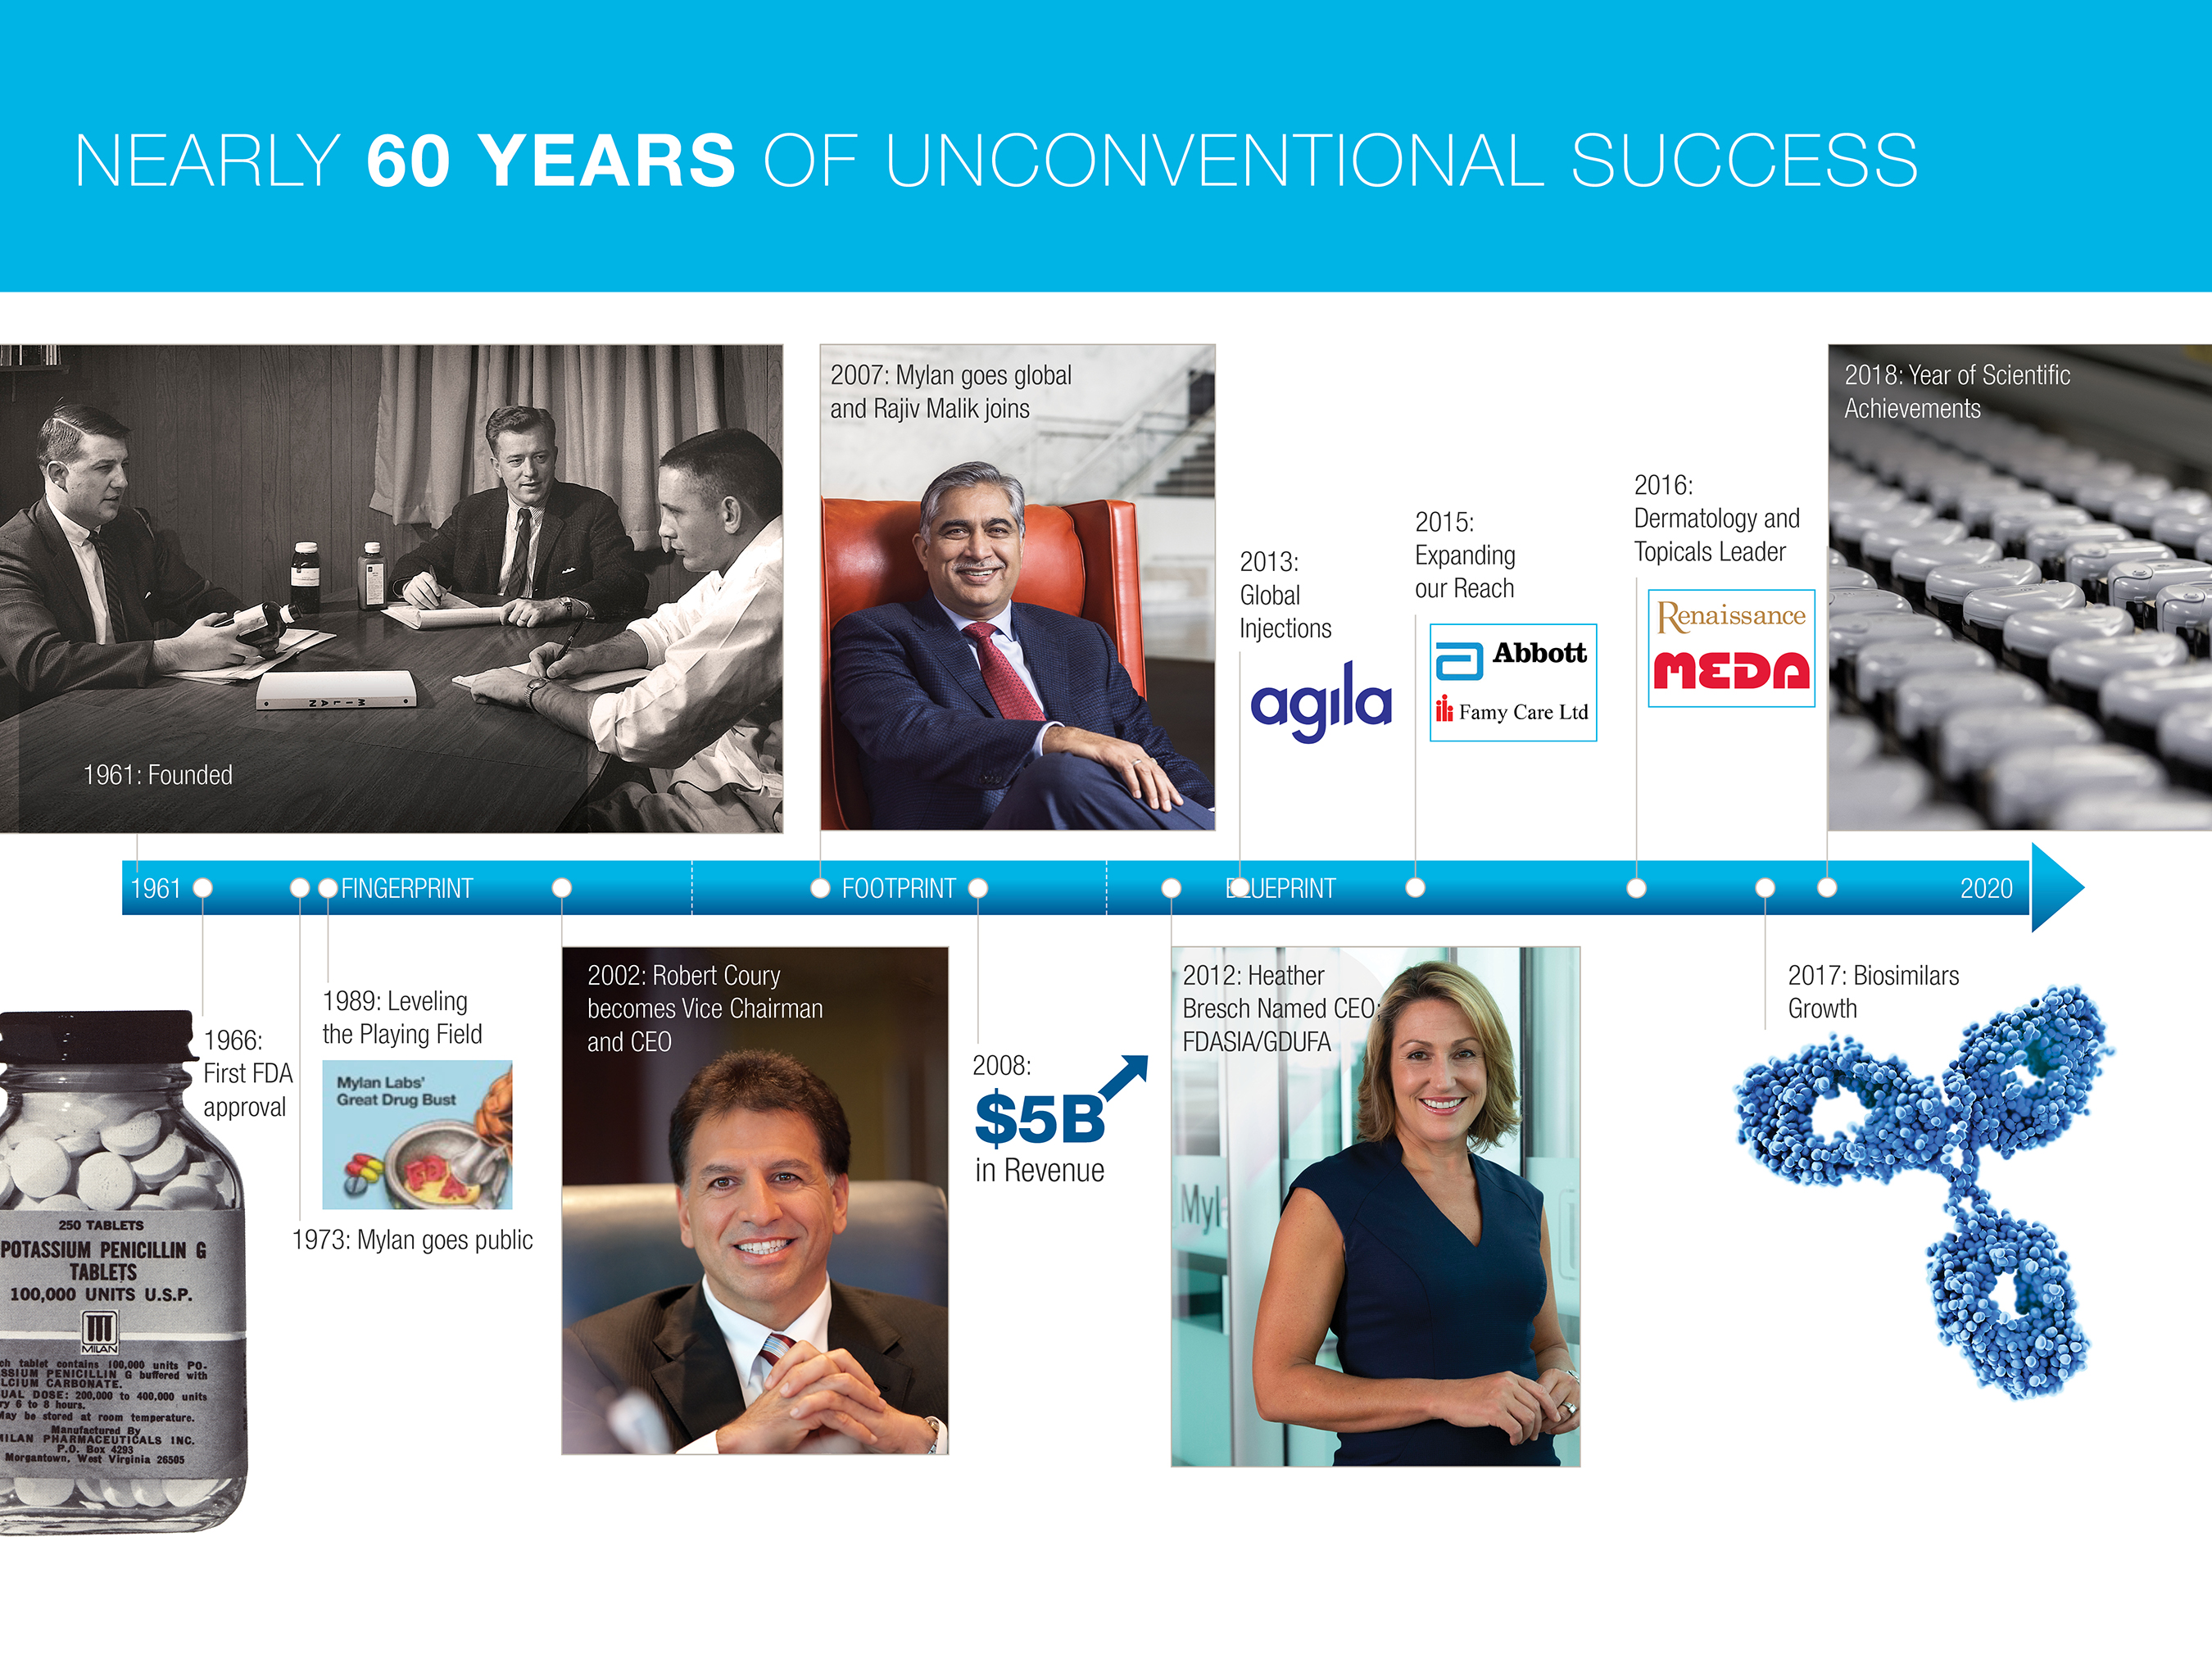 Nearly 60 Years of Unconventional Success